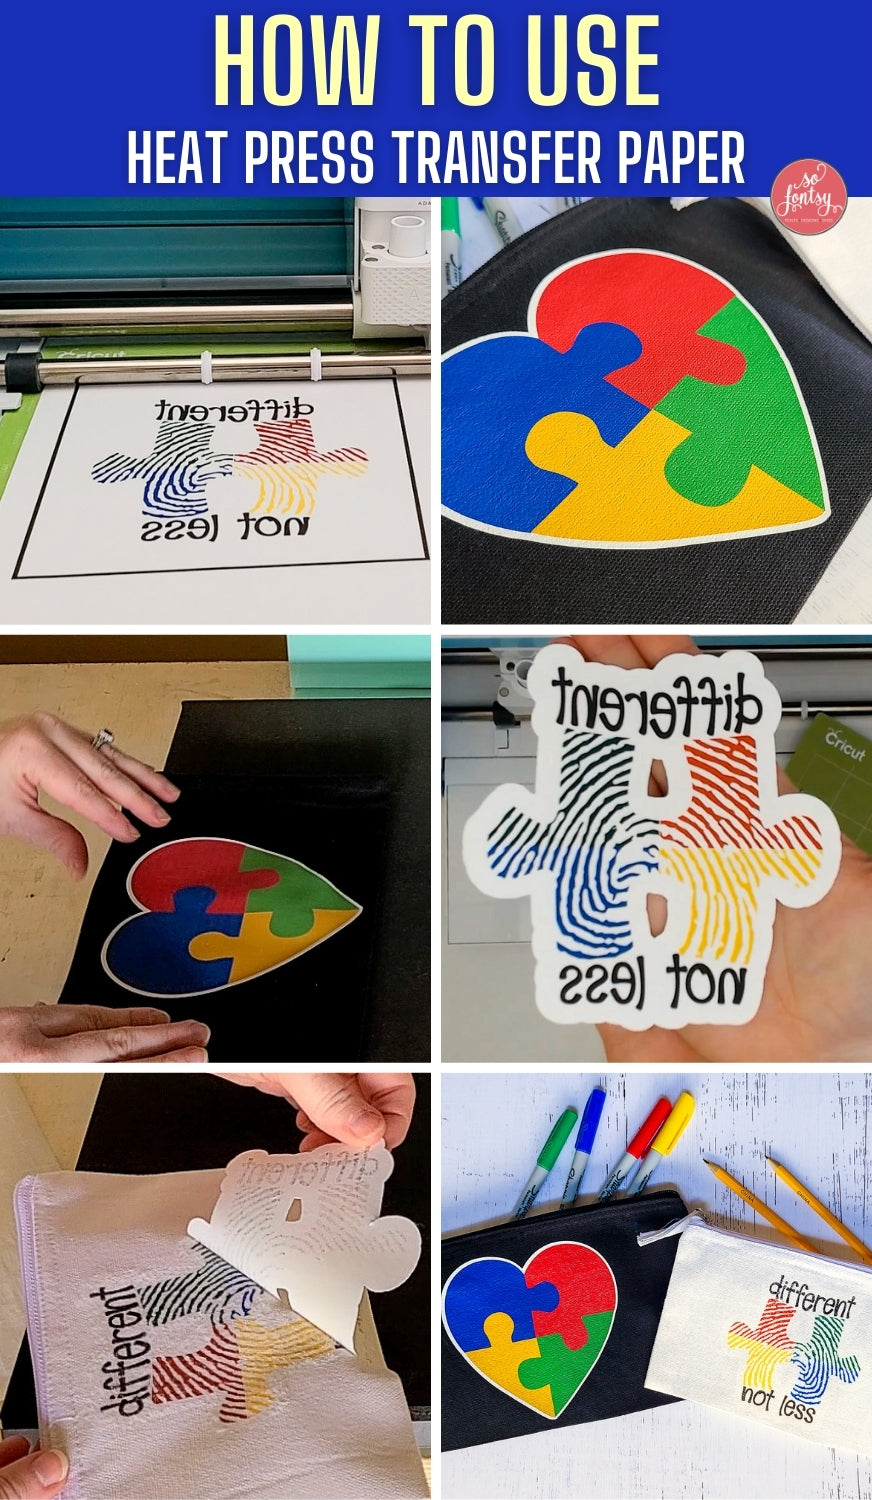 How to Choose the Best Heat Transfer Paper for Your Project